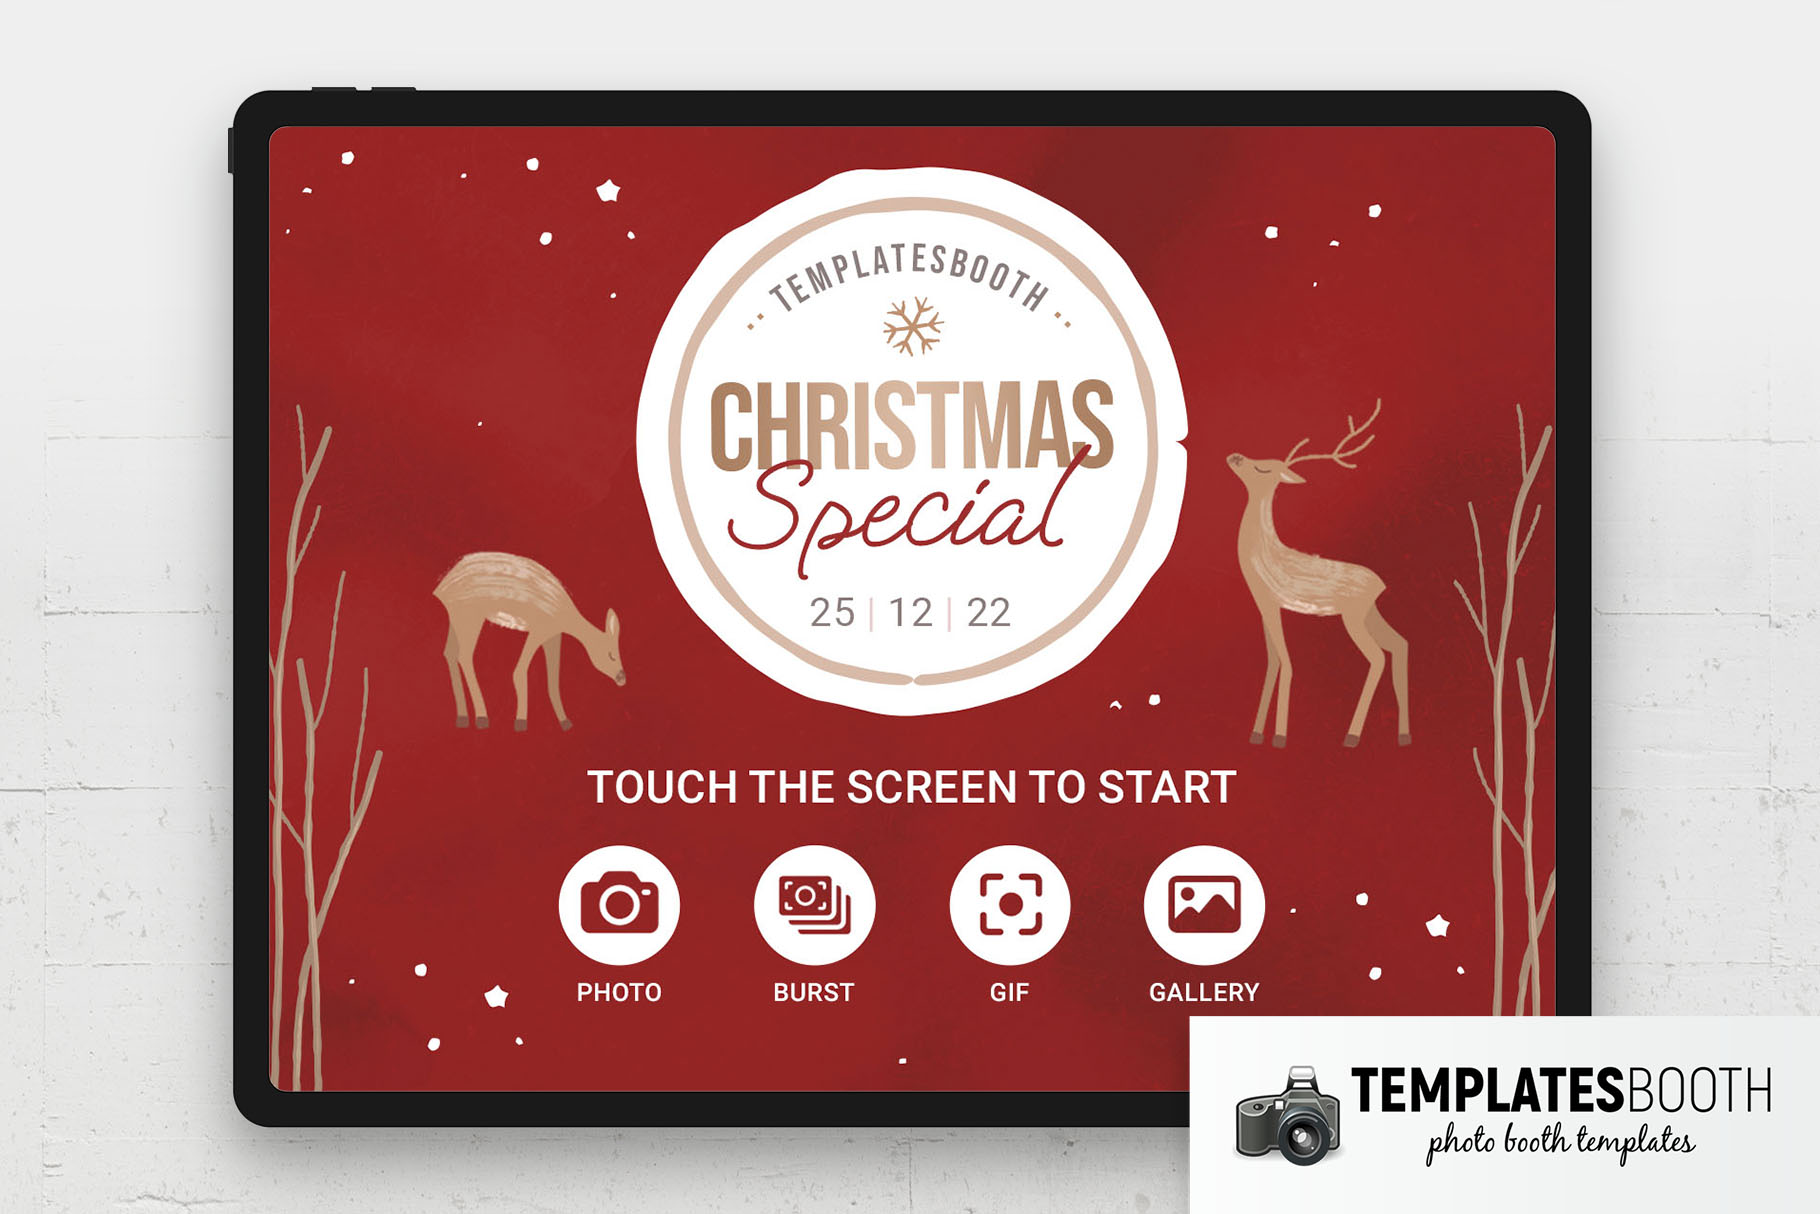 Christmas Photo Booth Welcome Screen